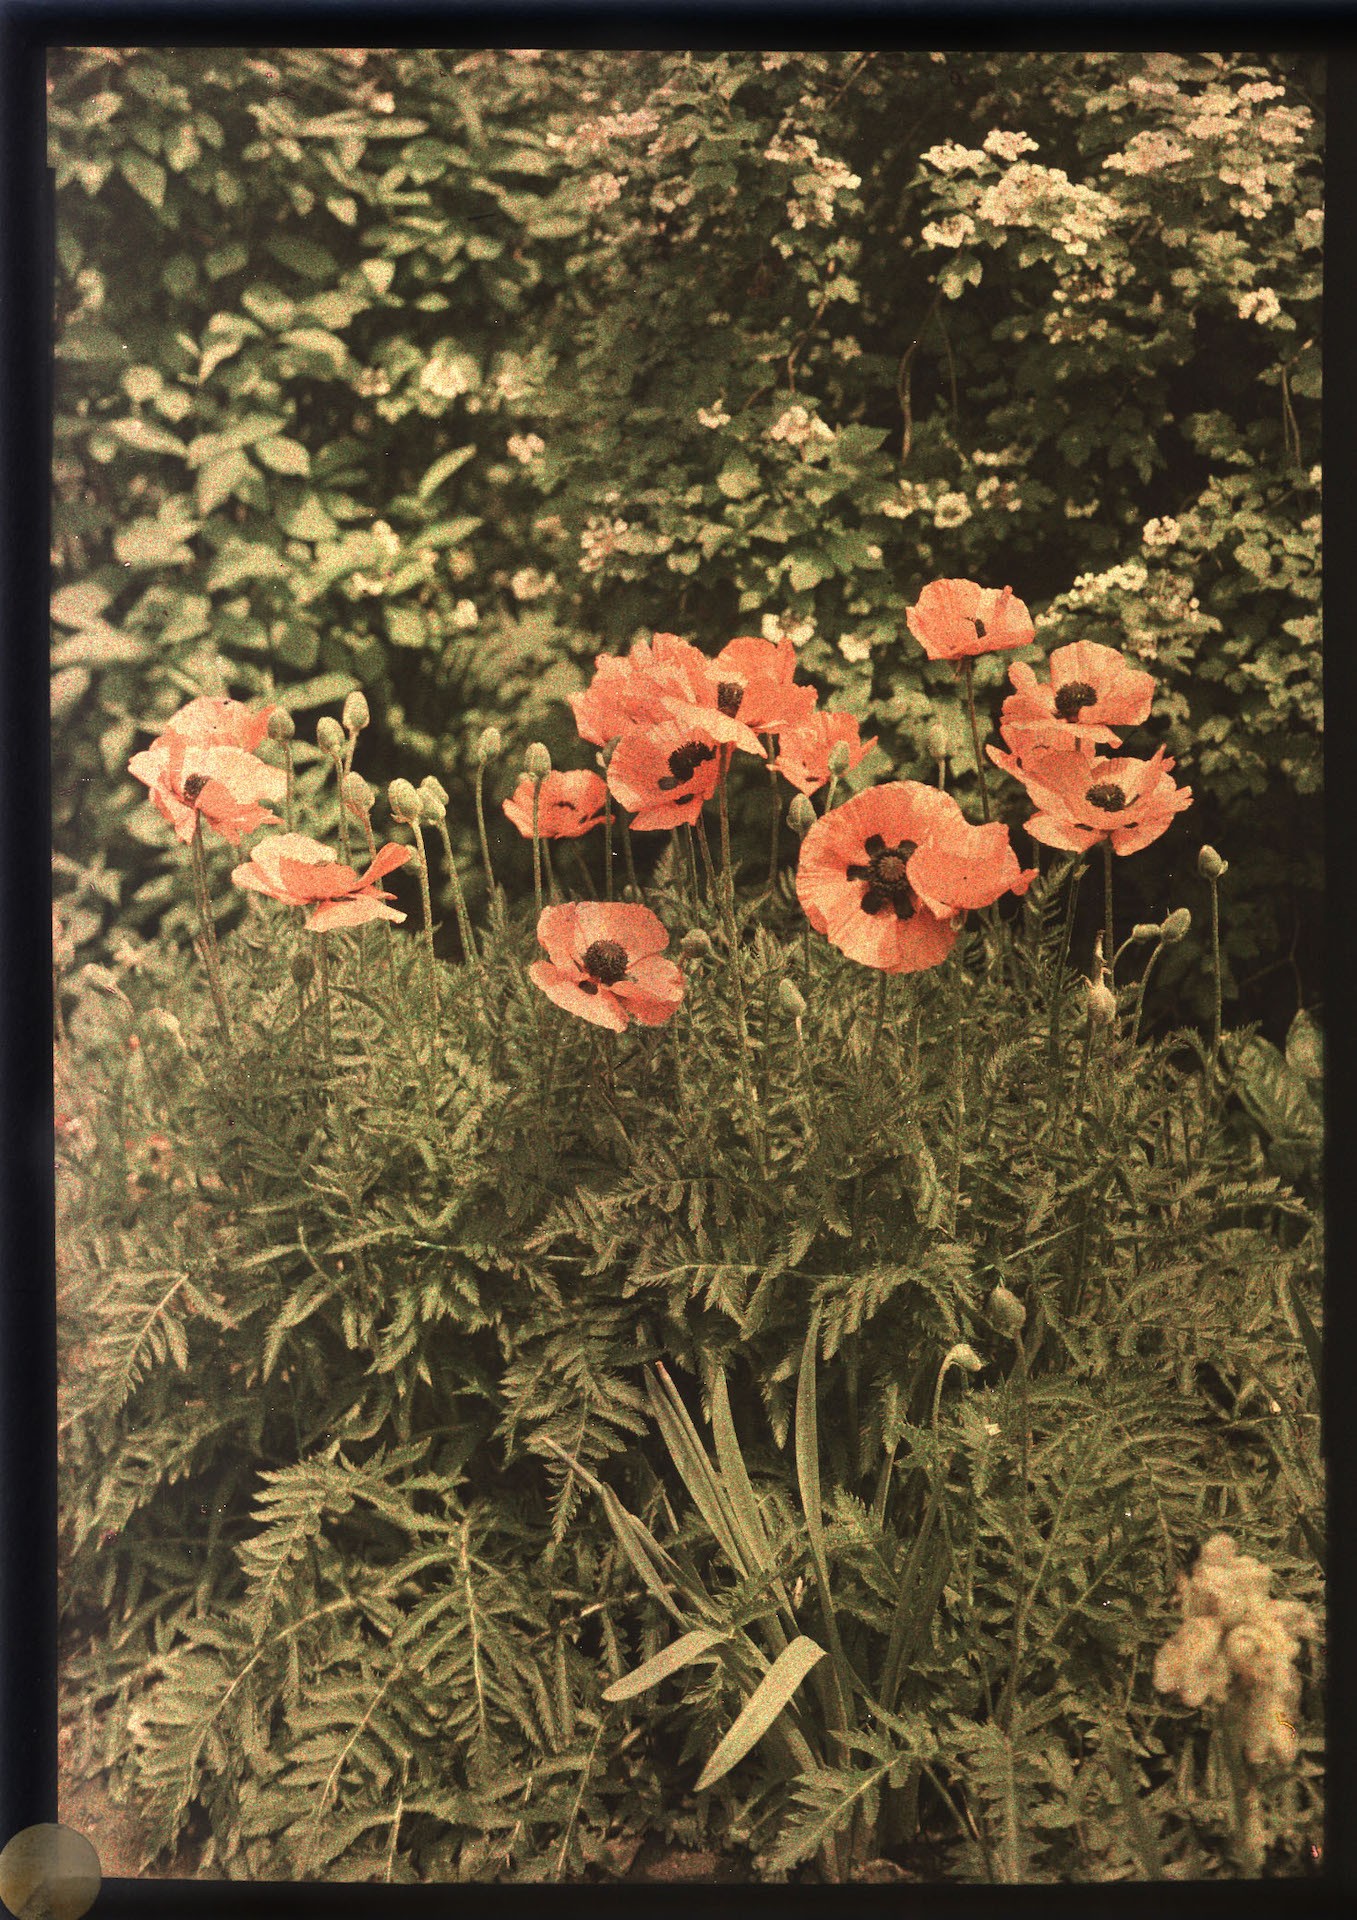 autochrome of red poppies surrounded by greenery